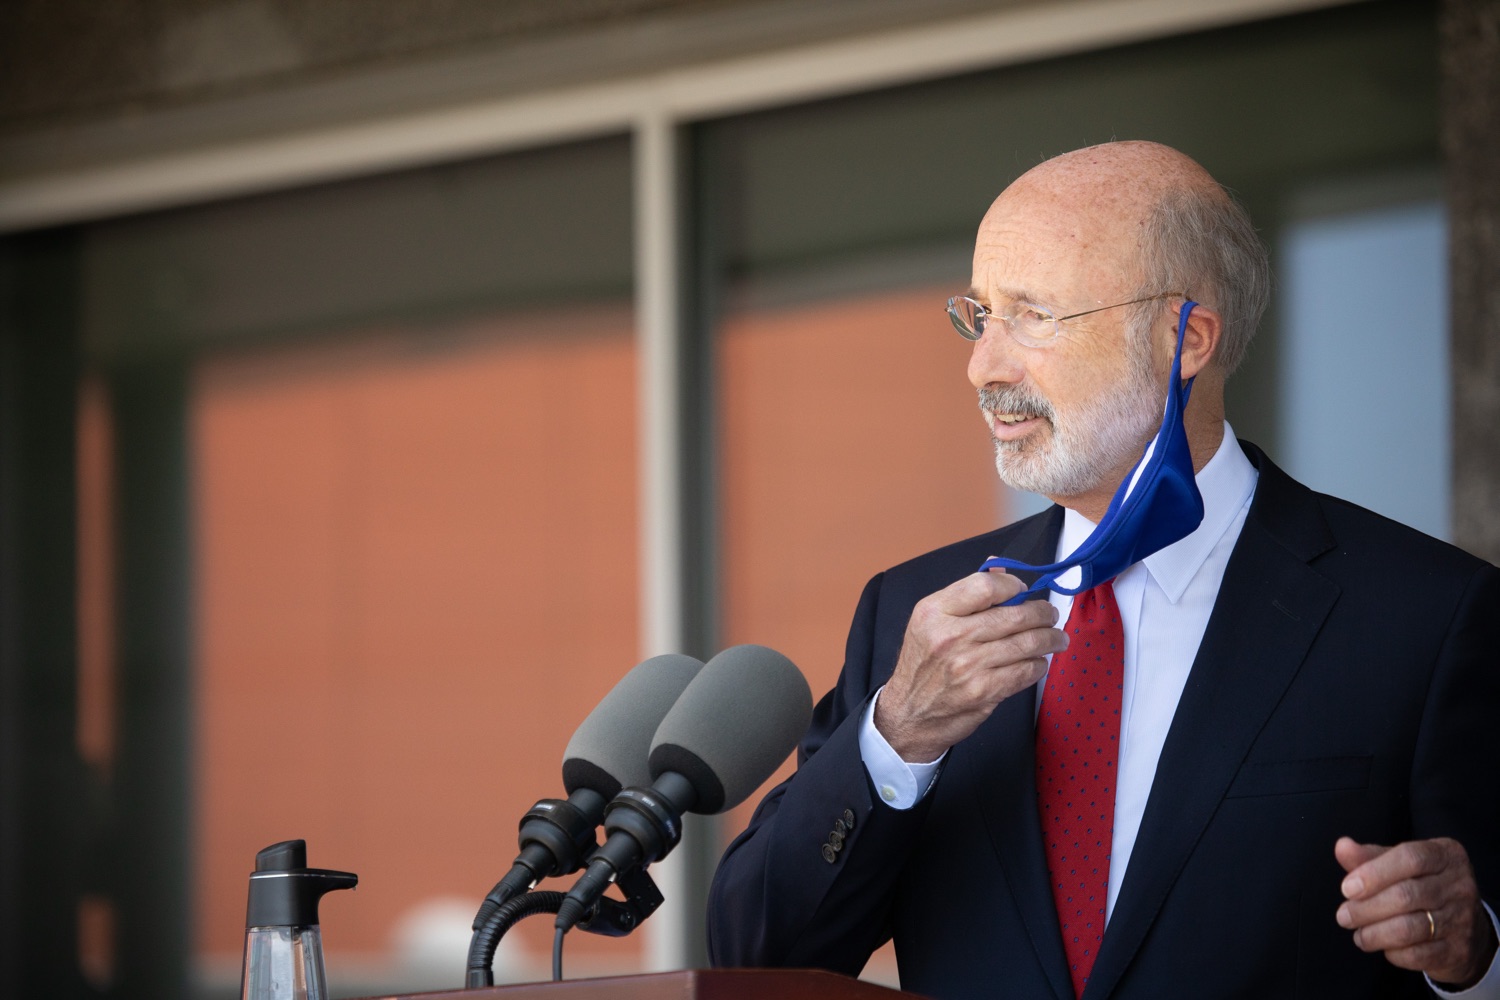 Pennsylvania Governor Tom Wolf speaking with the press.  Governor Tom Wolf visited the child care center at PSECU headquarters in Harrisburg today to announce $53 million in additional financial support for child care providers that have suffered during COVID-19.  Harrisburg, PA  July 6, 2020..<br><a href="https://filesource.amperwave.net/commonwealthofpa/photo/18143_gov_cares_dz_19.jpg" target="_blank">⇣ Download Photo</a>